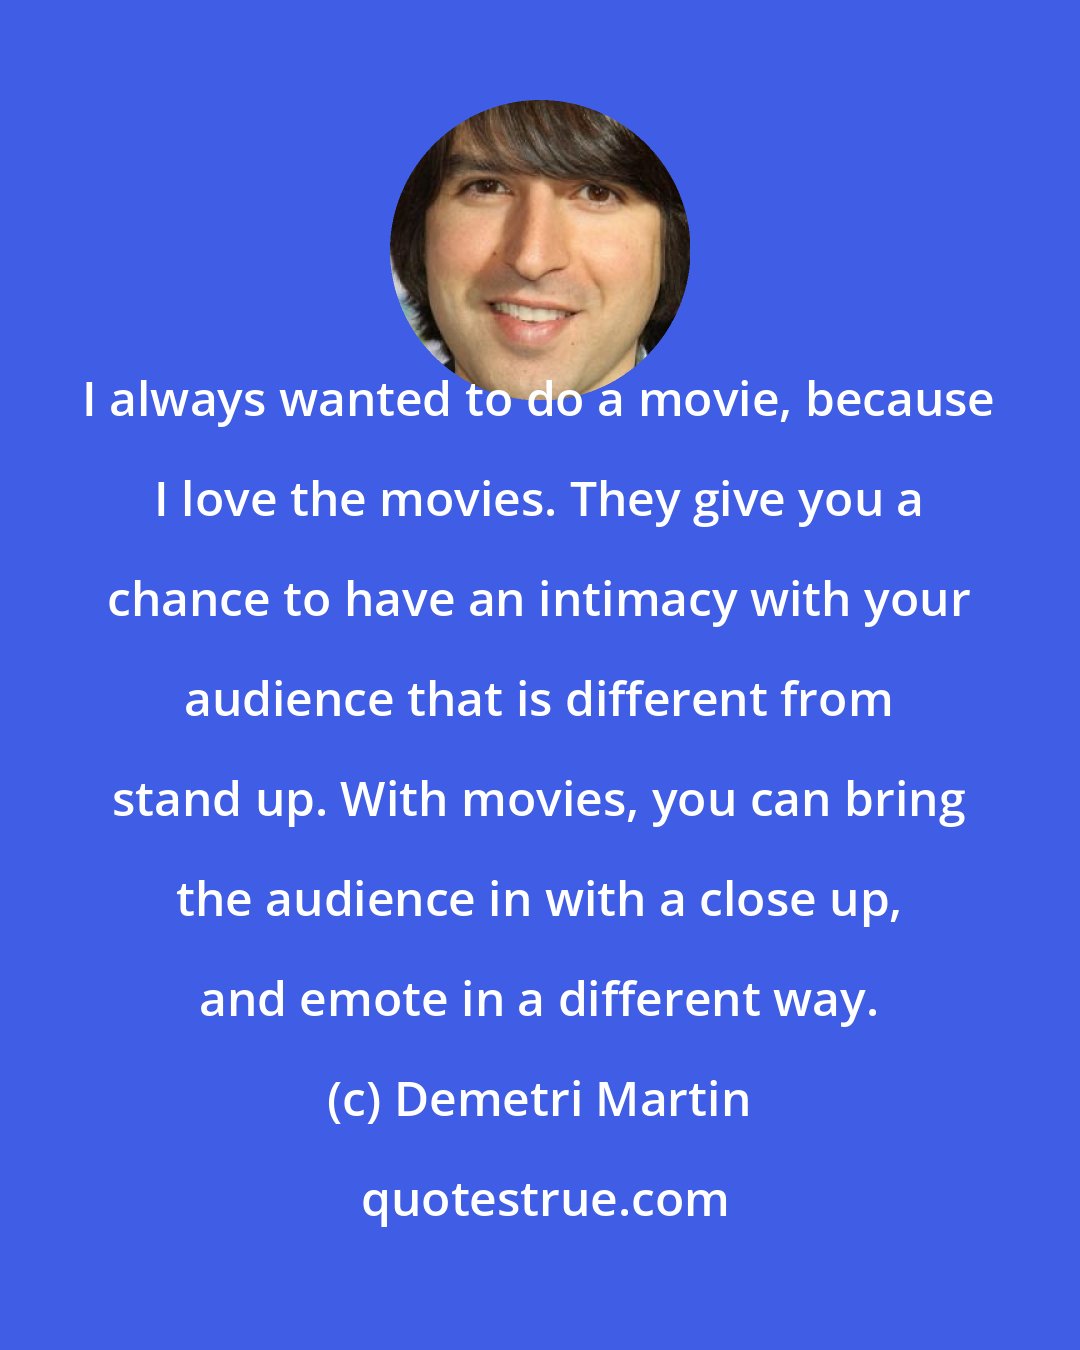 Demetri Martin: I always wanted to do a movie, because I love the movies. They give you a chance to have an intimacy with your audience that is different from stand up. With movies, you can bring the audience in with a close up, and emote in a different way.